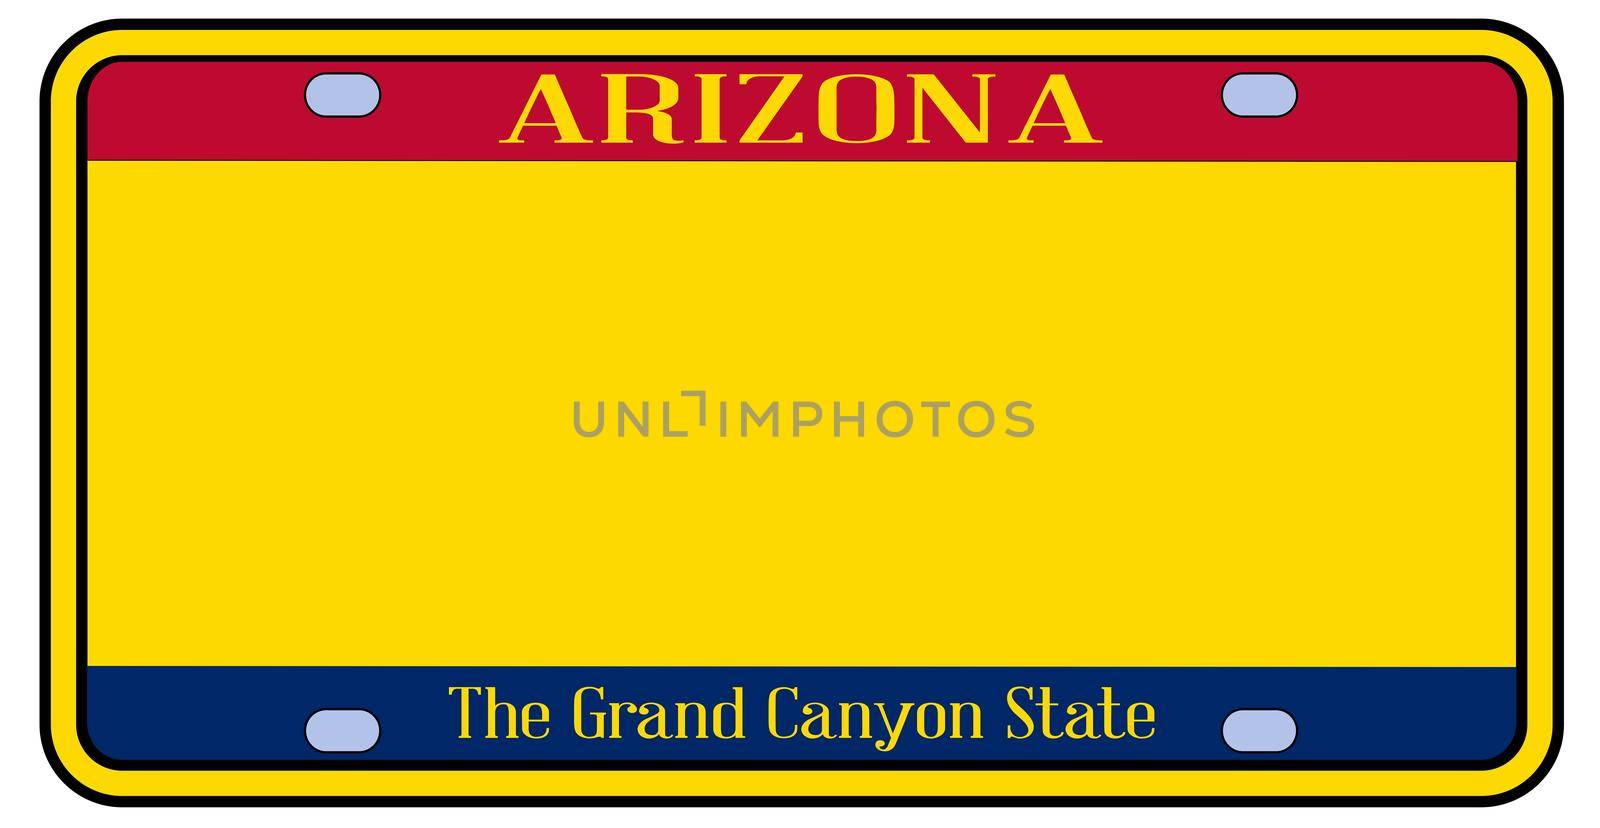 Blank Arizona state license plate in the colors of the state flag over a white background